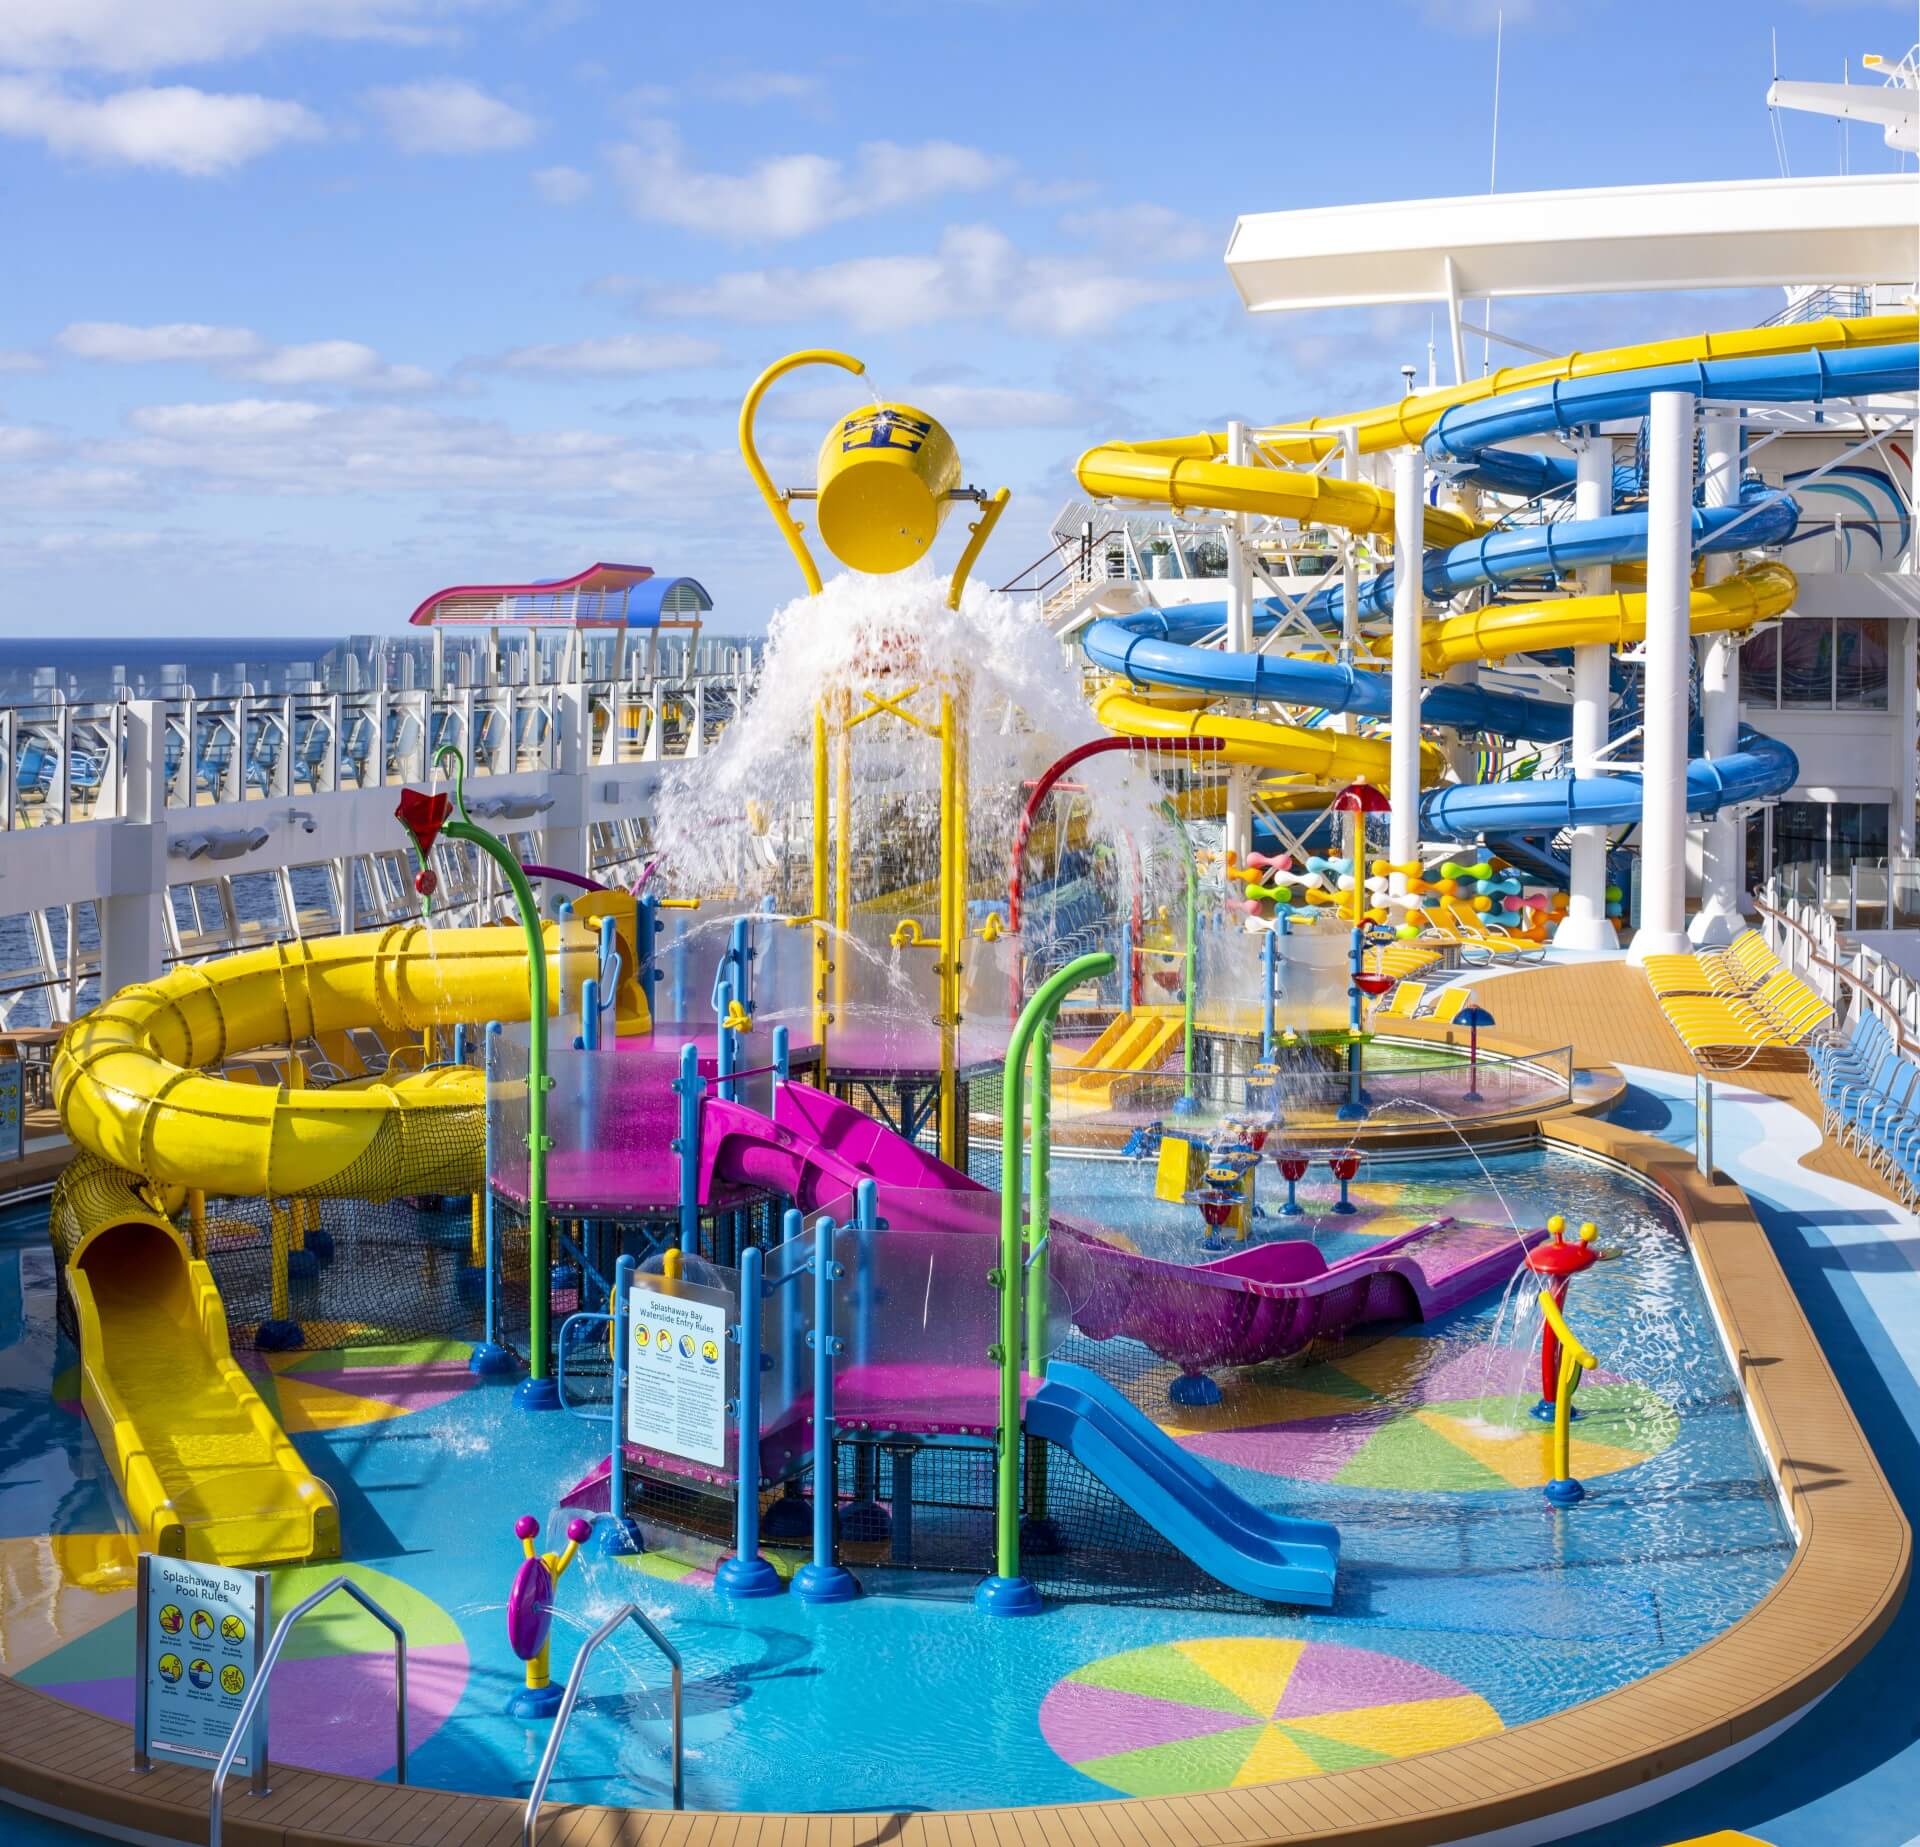 Waterslides and children's aquapark on Royal Caribbean's Wonder of the Seas